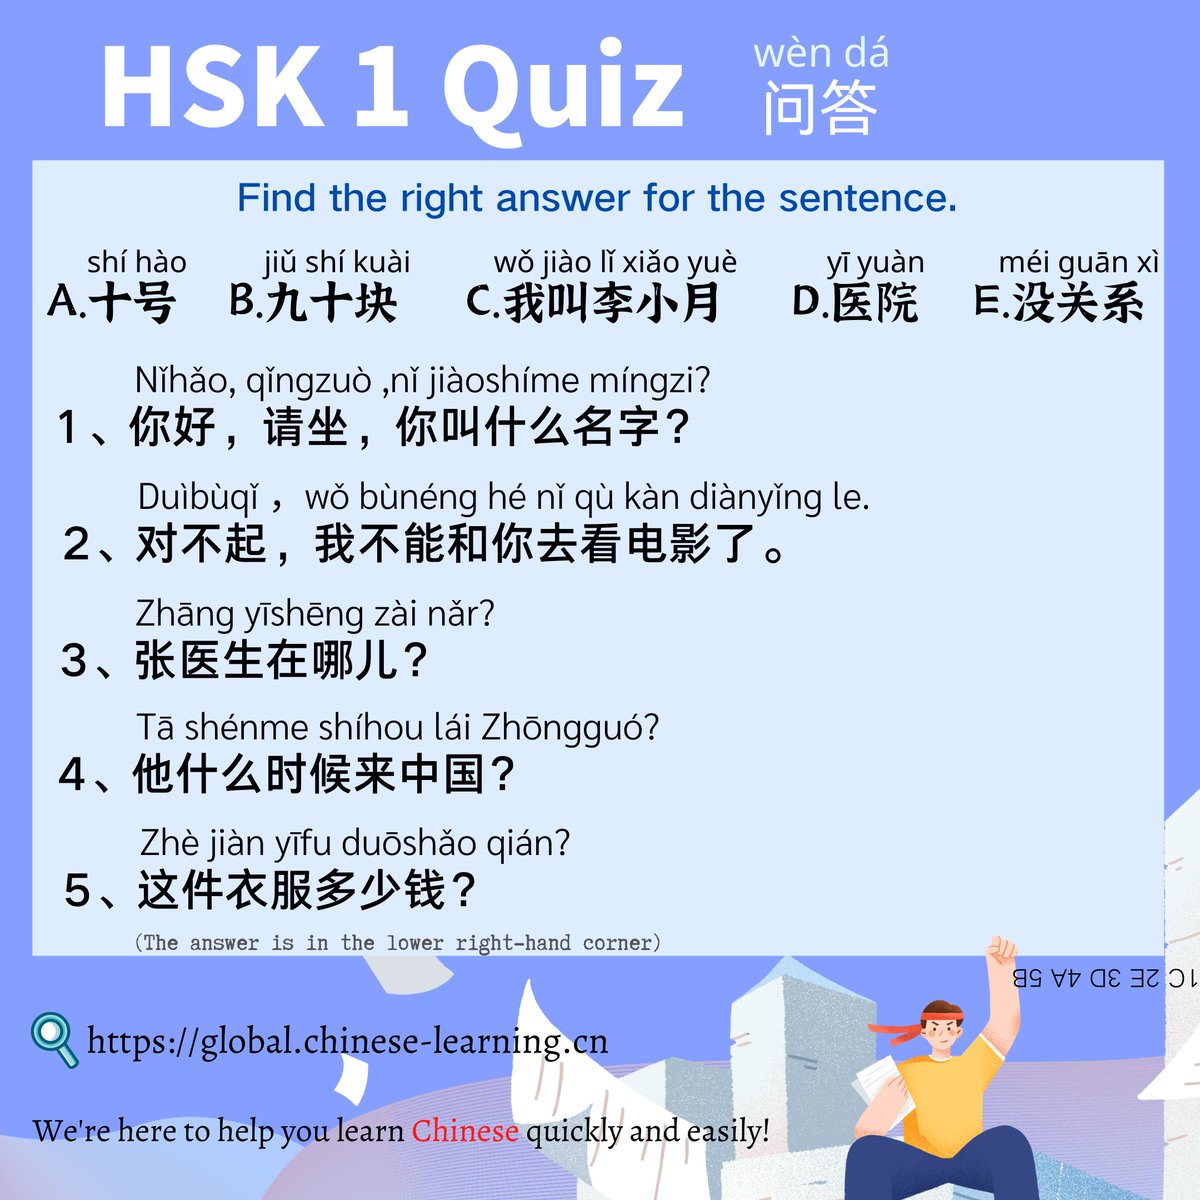 HSK1 Quiz Find the right answer for the sentence. #HSK #汉语 #学汉语 #Chineselearning #studytwt #HSK #学中文 #studytwt #mandarin